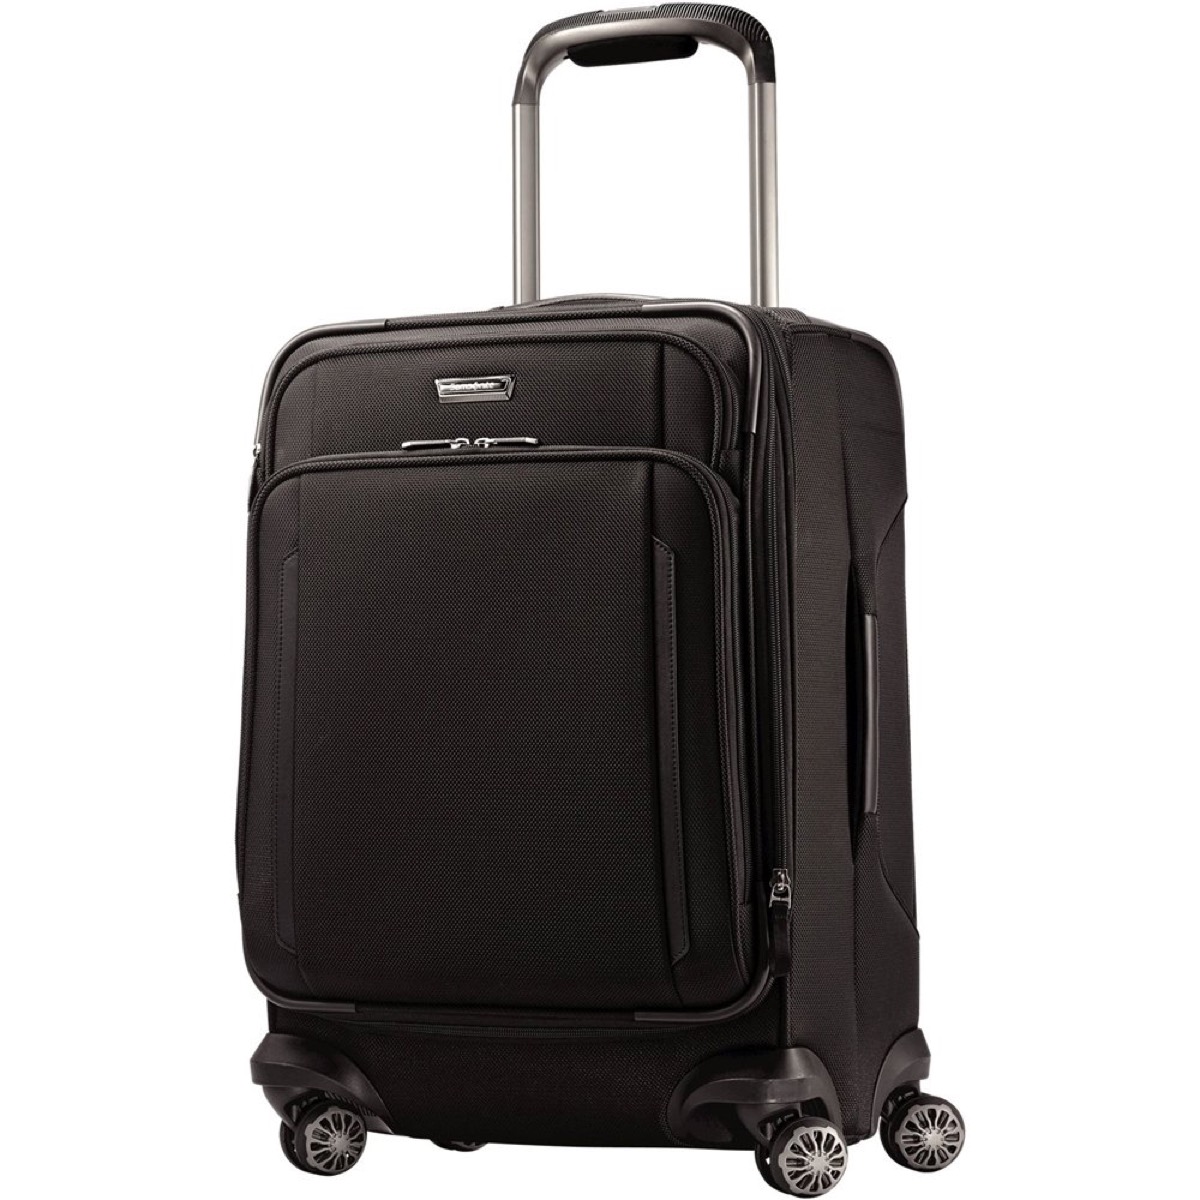 Samsonite Suitcase {Cheap items From Best Buy}